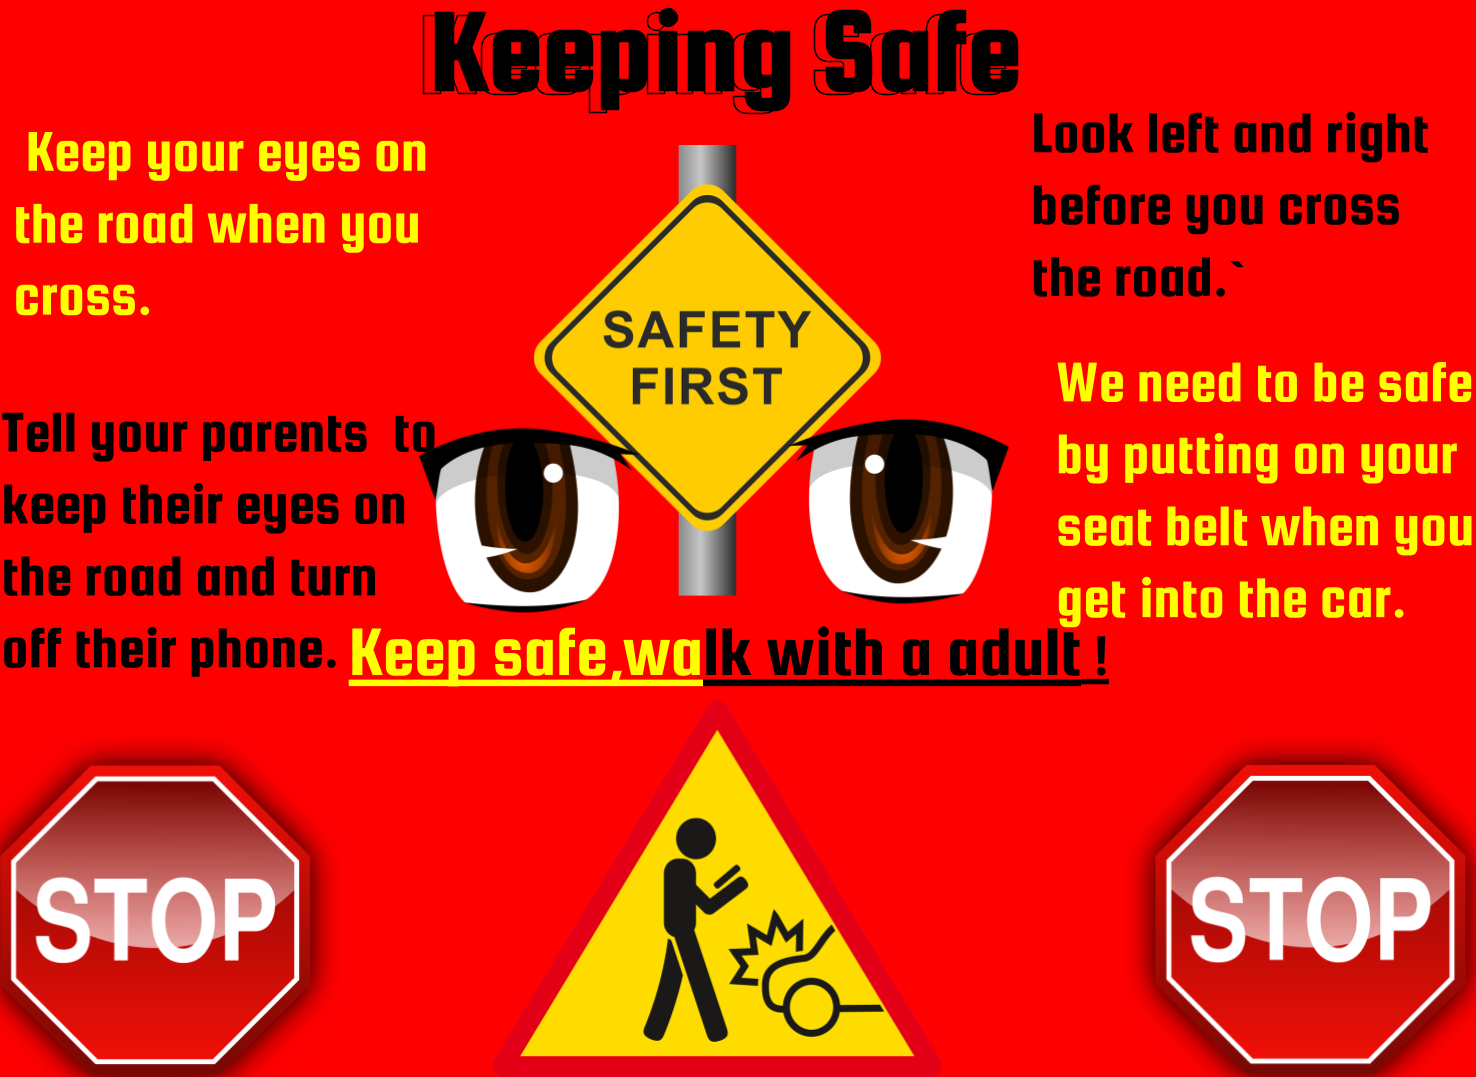 Keep me safe. Safety is first. To be safe картинки. Be safe on the Road. Постер be safe at School с переводом.